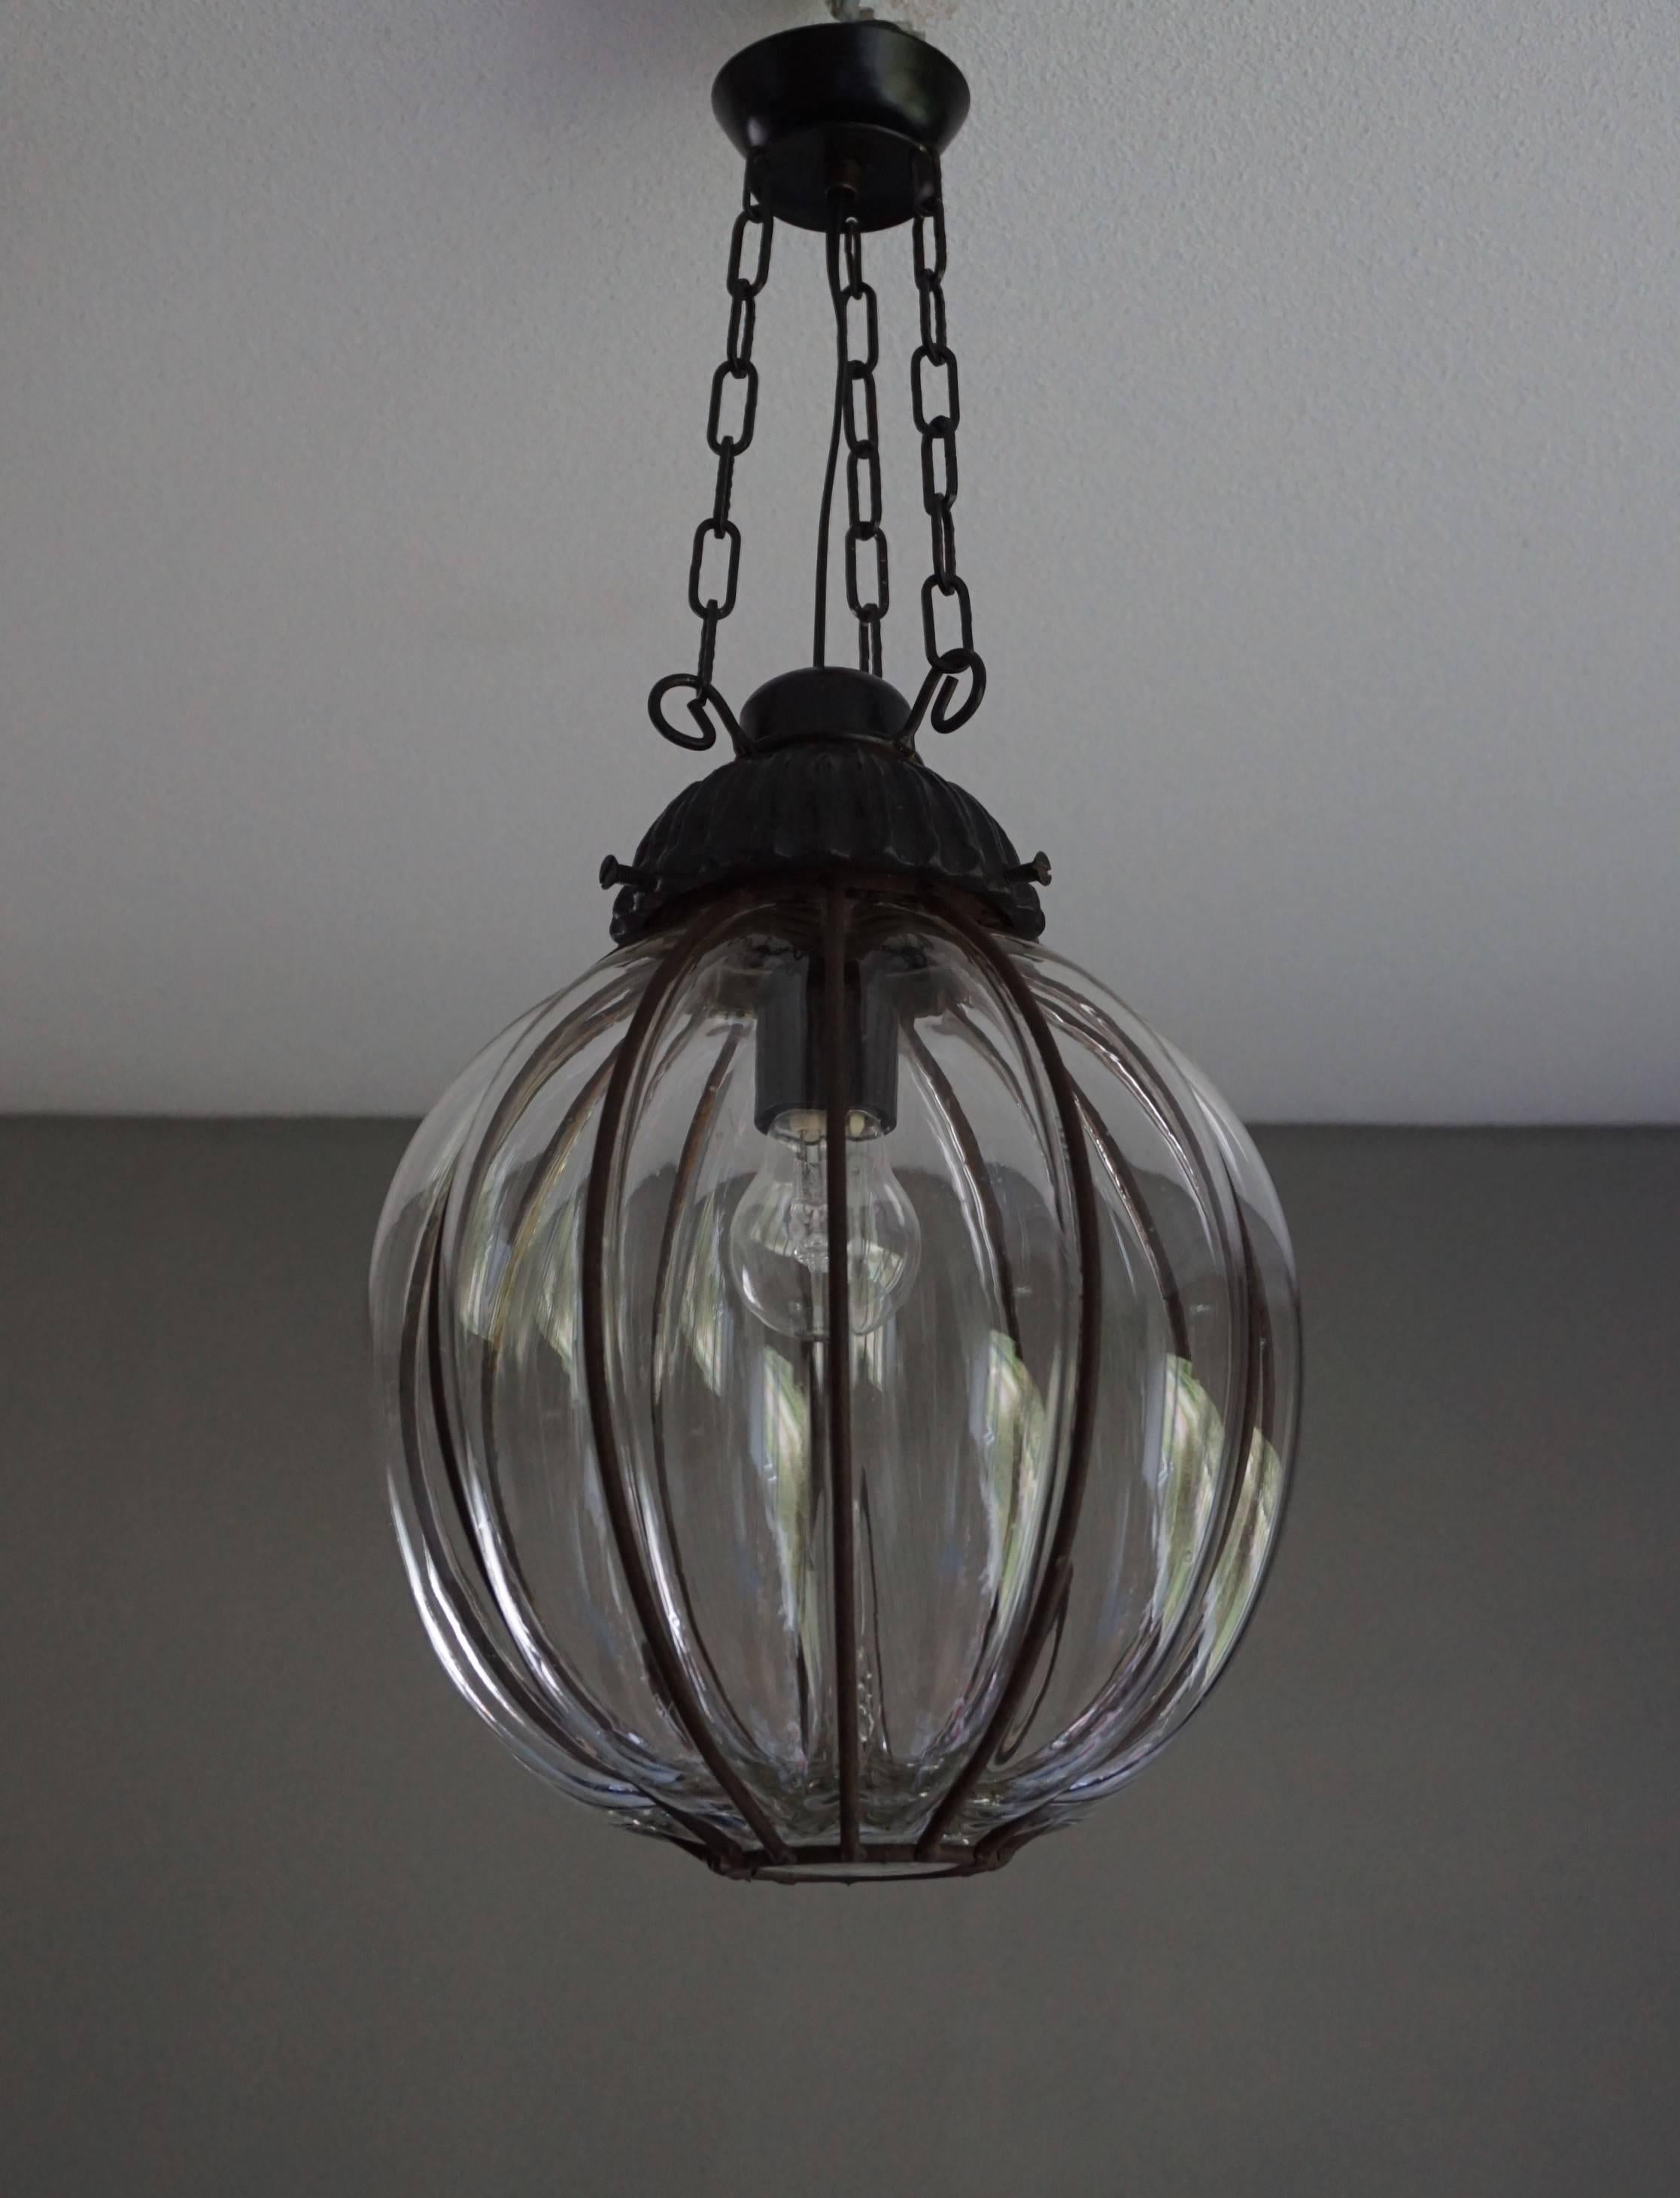 Timeless, circular shape Venetian pendant.

This rare midcentury pendant is mouthblown into a perfectly symmetrical and circular shape. The thick transparent glass below the strong black metal gallery makes it an absolute joy to look at, both on